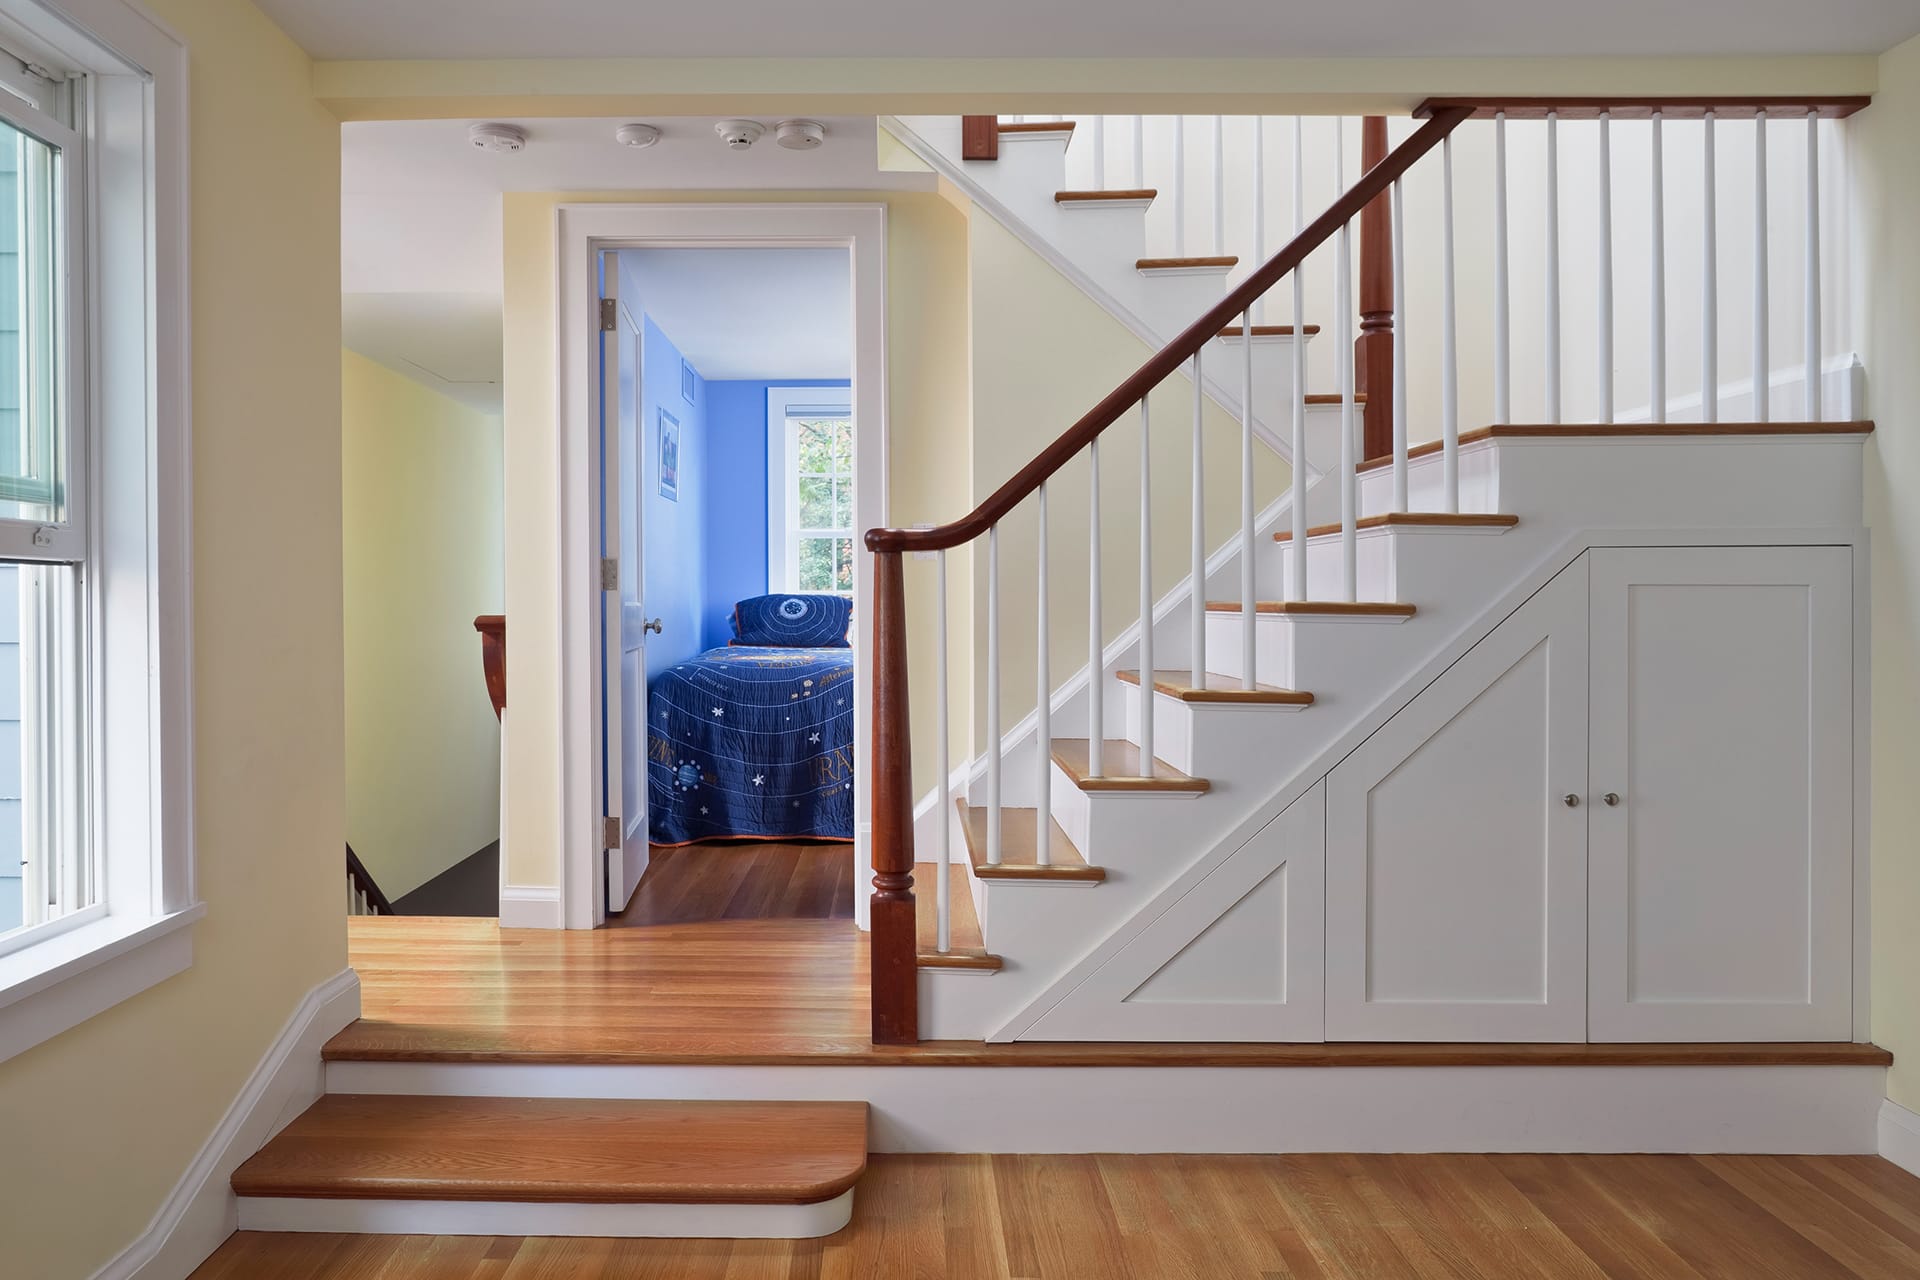 Stairwell with white millwork, dark wood floors and handrails, looking into a blue child's bedroom